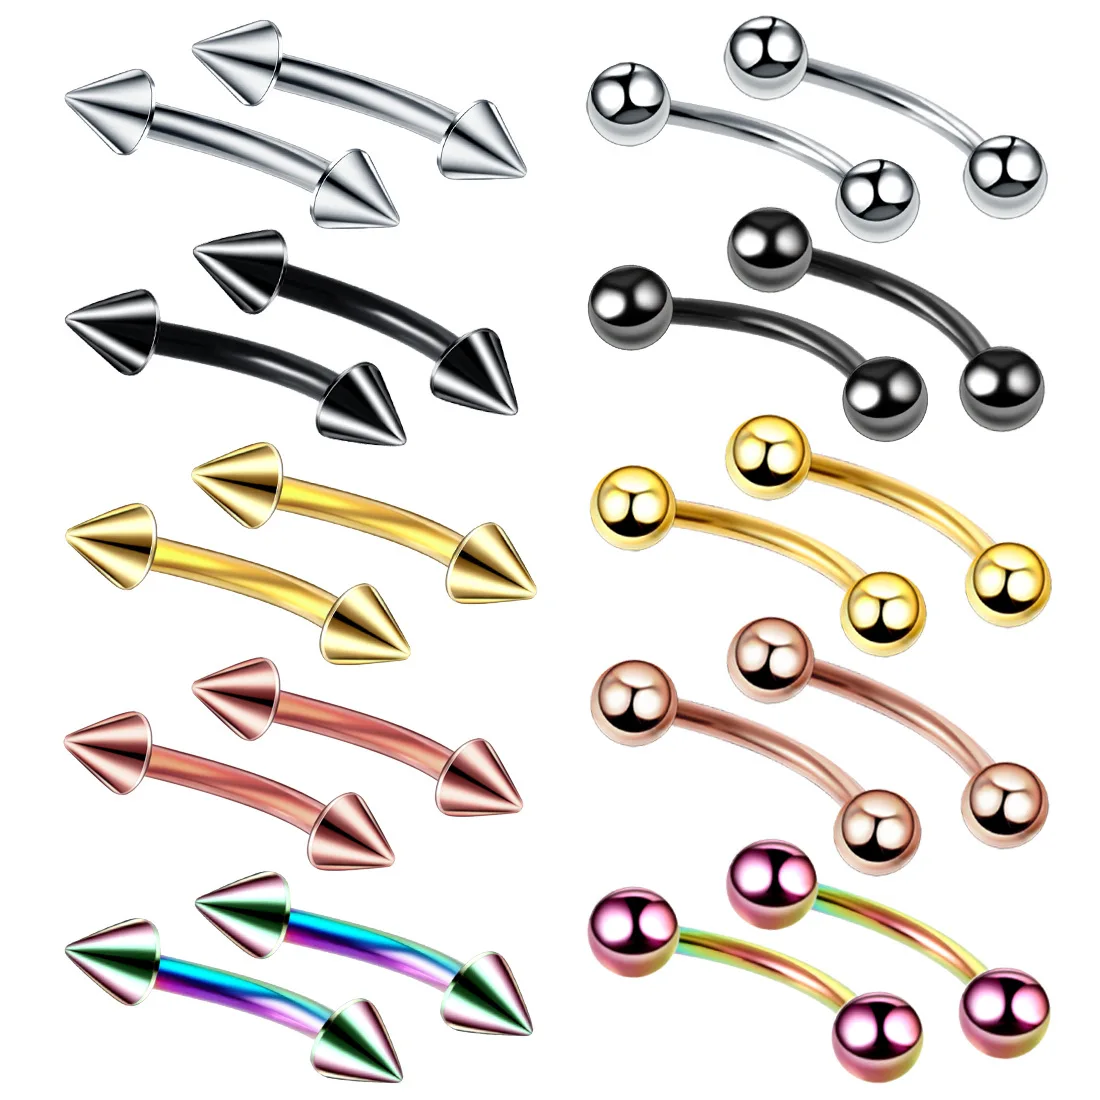 

NUORO Stainless Steel Multicolor Multi-size Tattoo Piercing Jewelry Eyebrow Nail Lip Nail Ear Nail Cartilage Puncture Jewelry, As pic